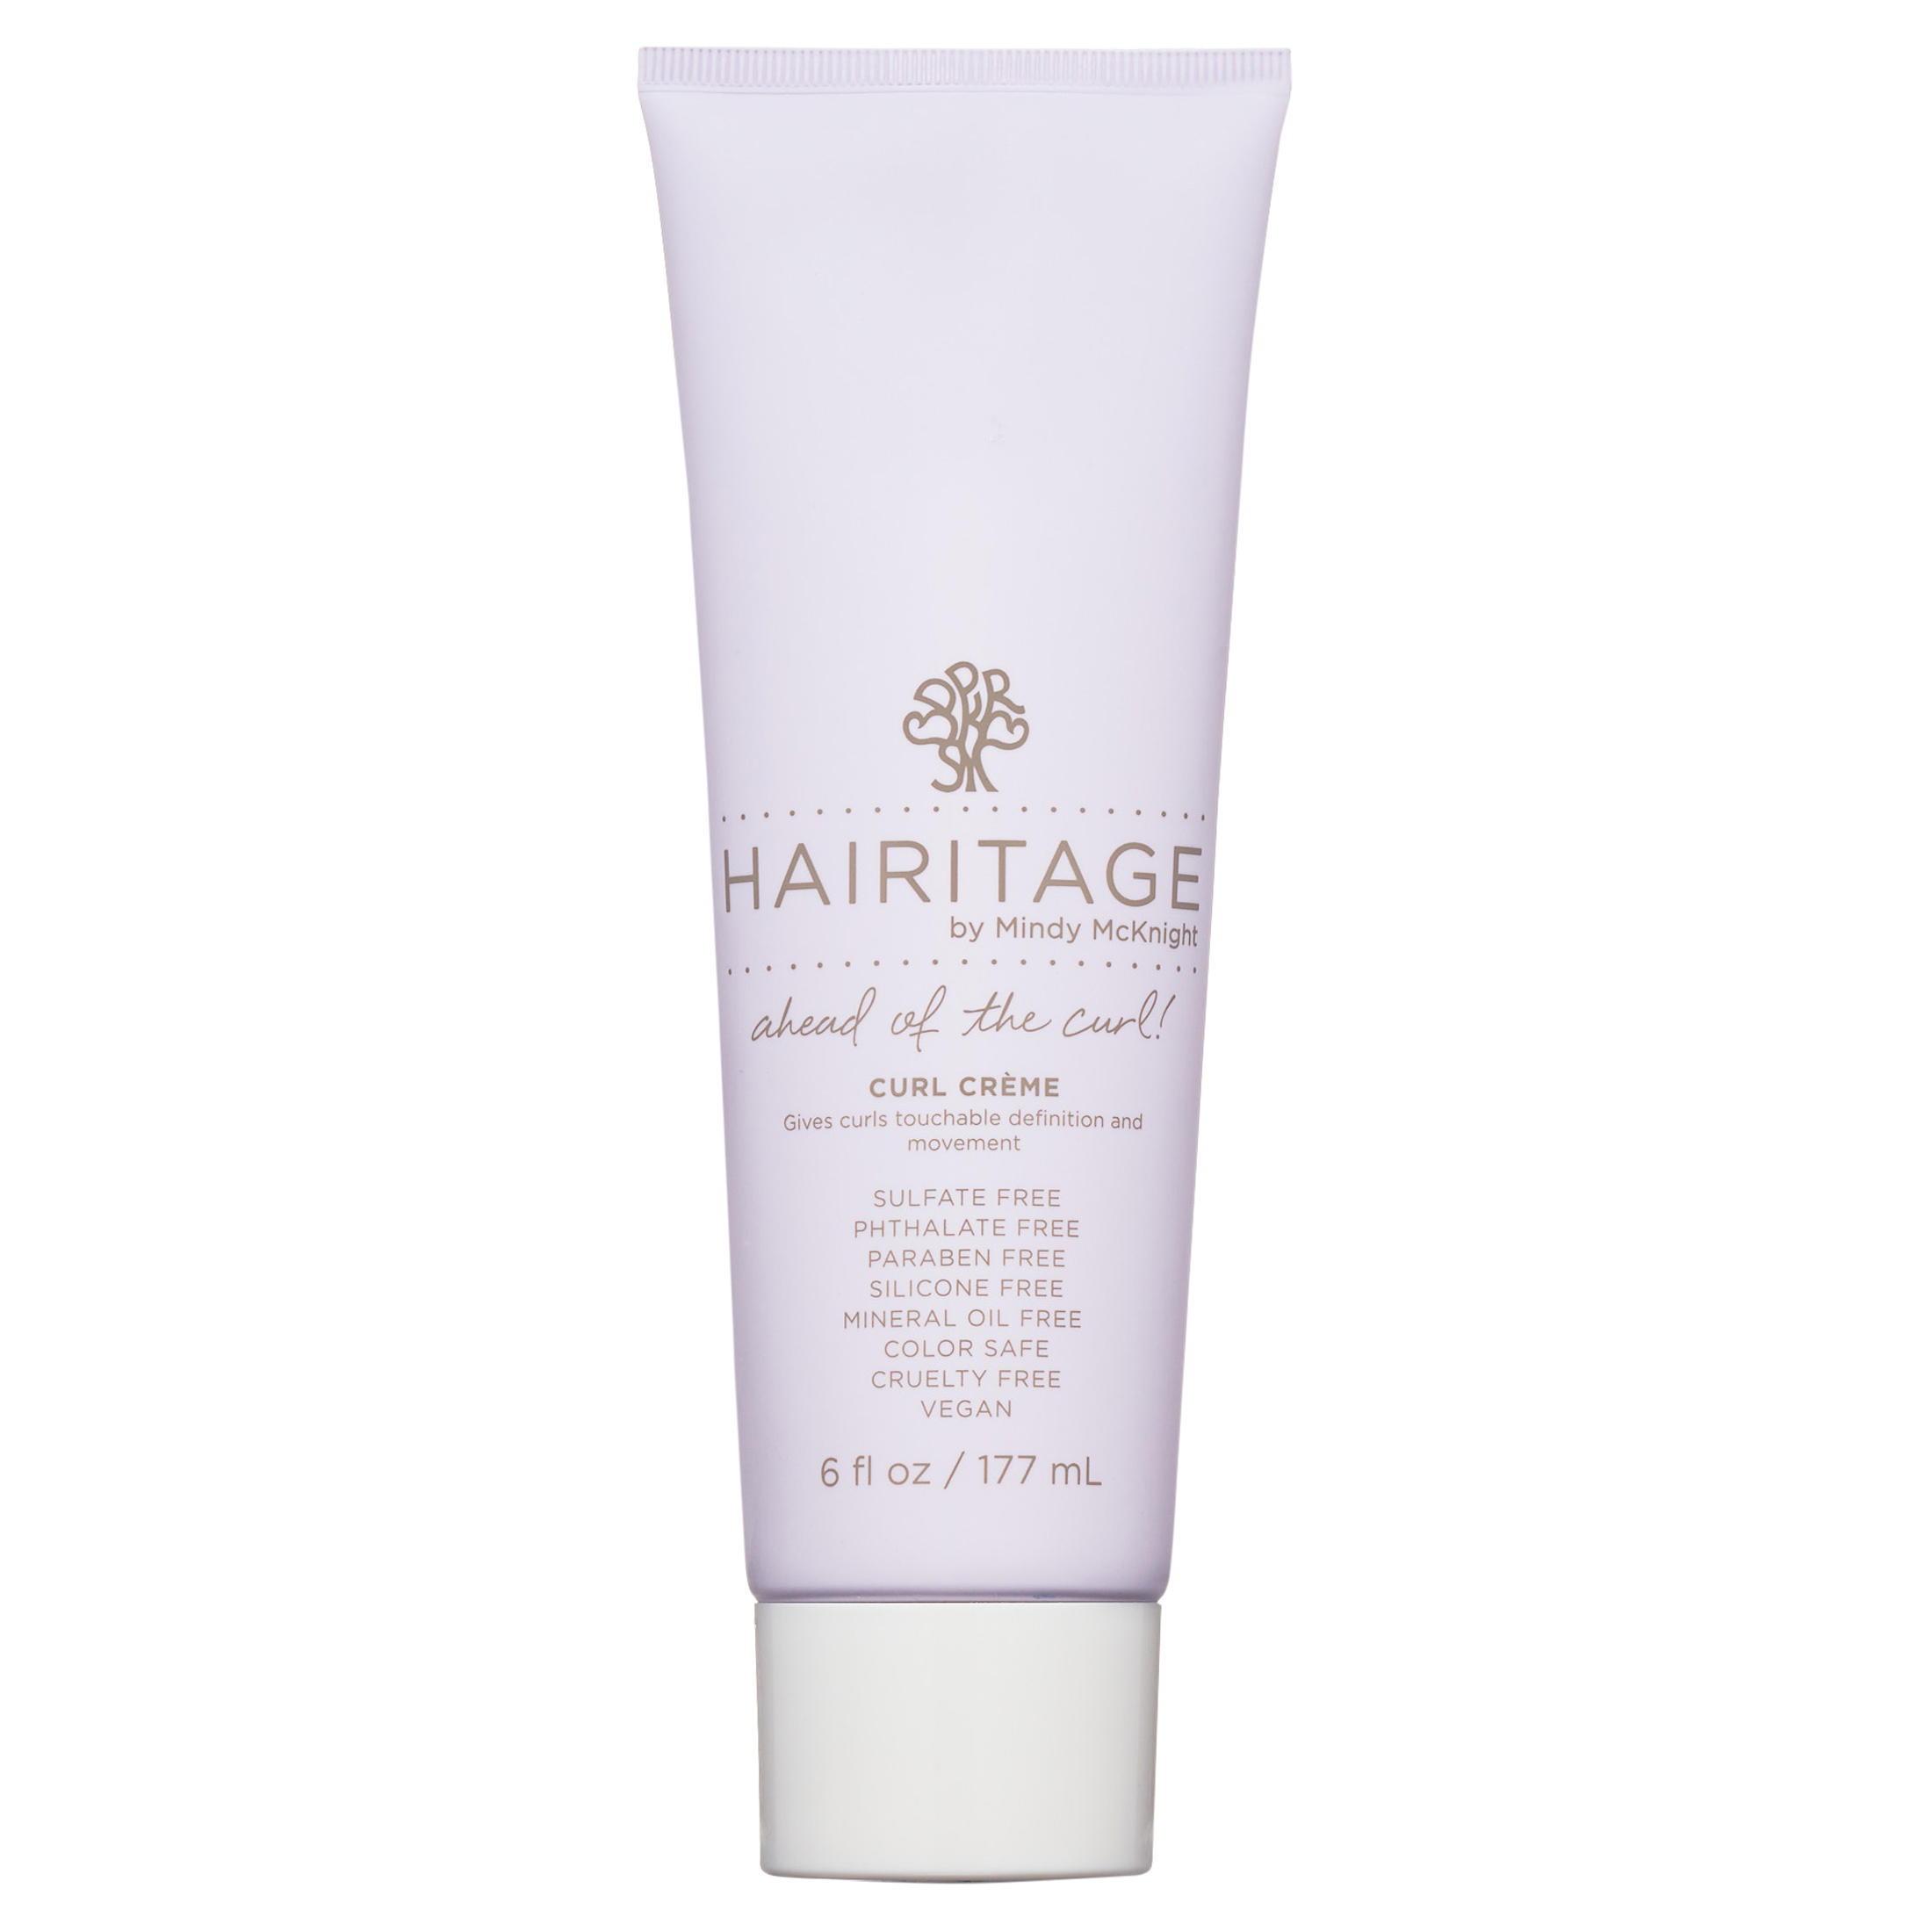 Hairitage Ahead of the Curl! Hydrating Curl Cream with Jojoba Oil for Hair | Coily & Curly Hair Product | Curl Defining Cream for Frizz Control | Color Safe, Vegan, 6 oz. - image 1 of 7